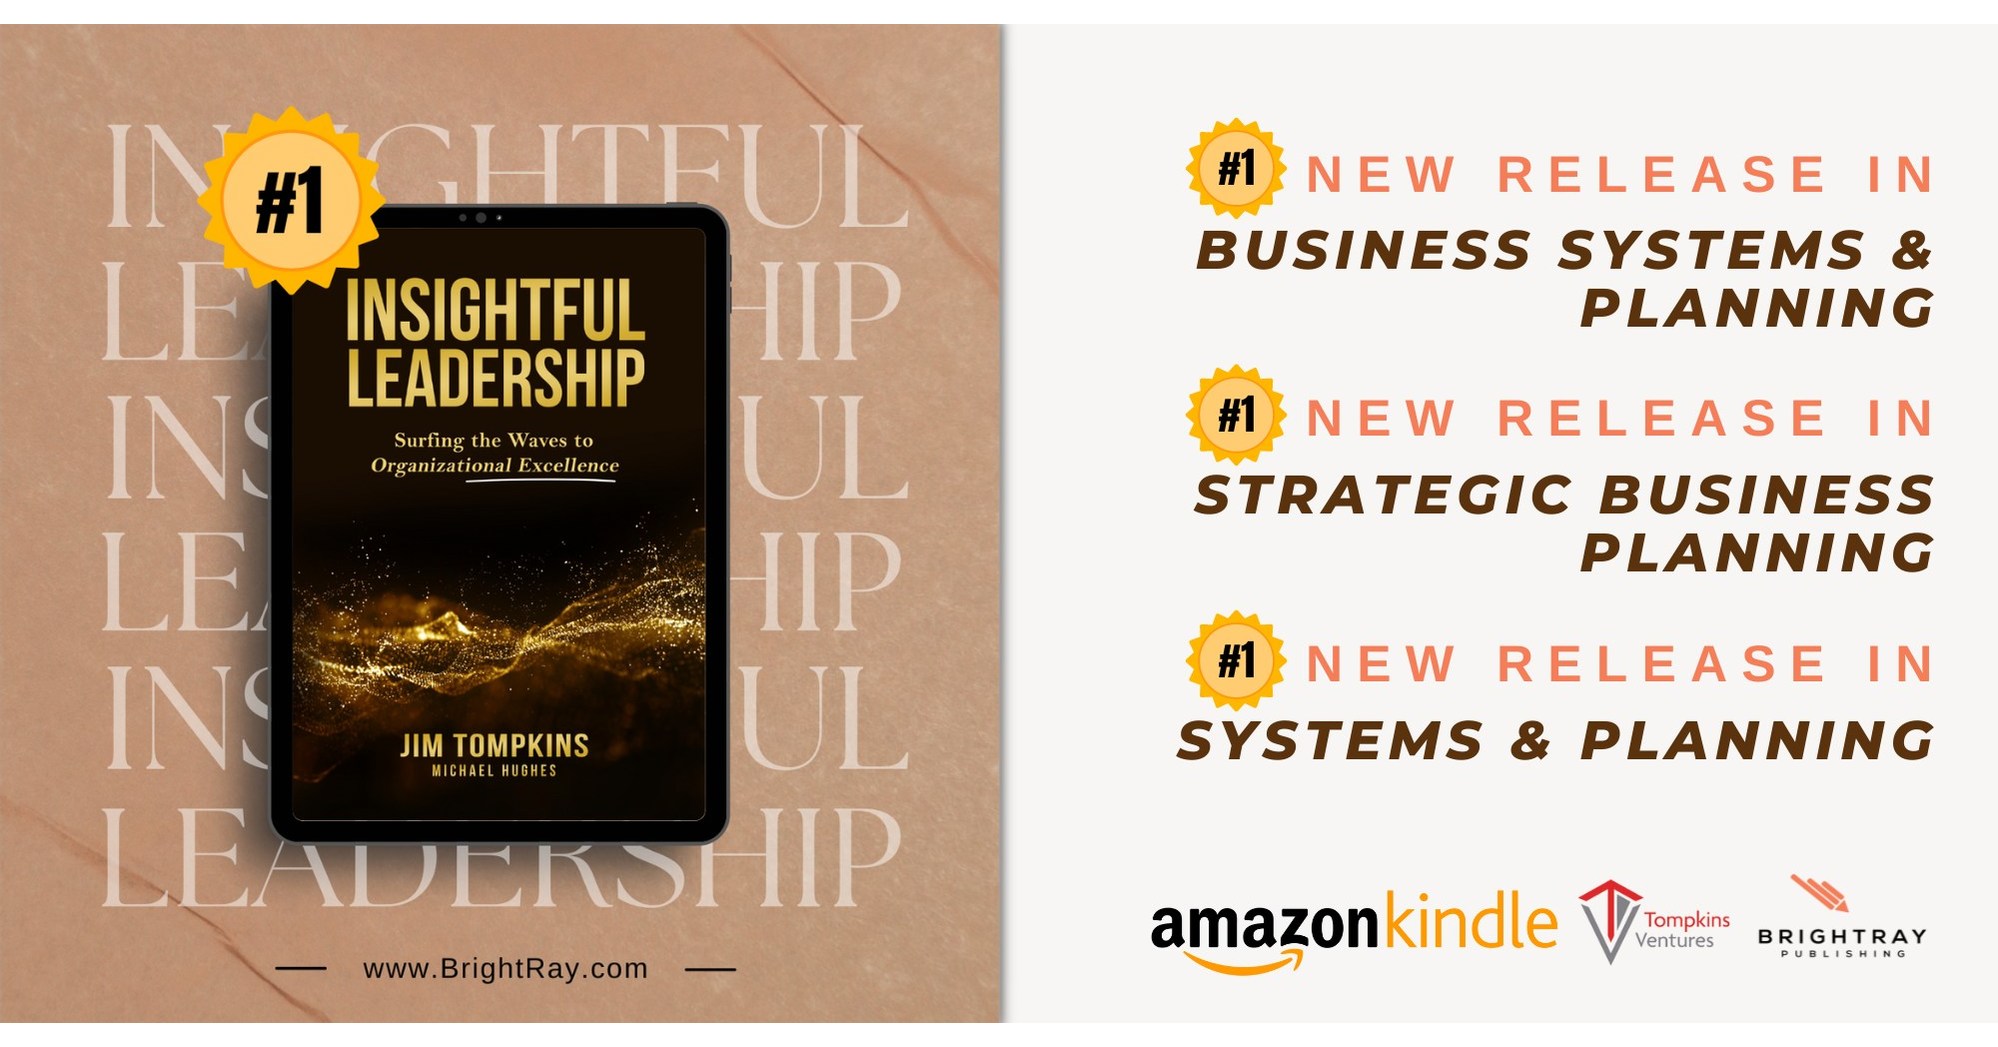 International Supply Chain Authority Releases Leadership Book